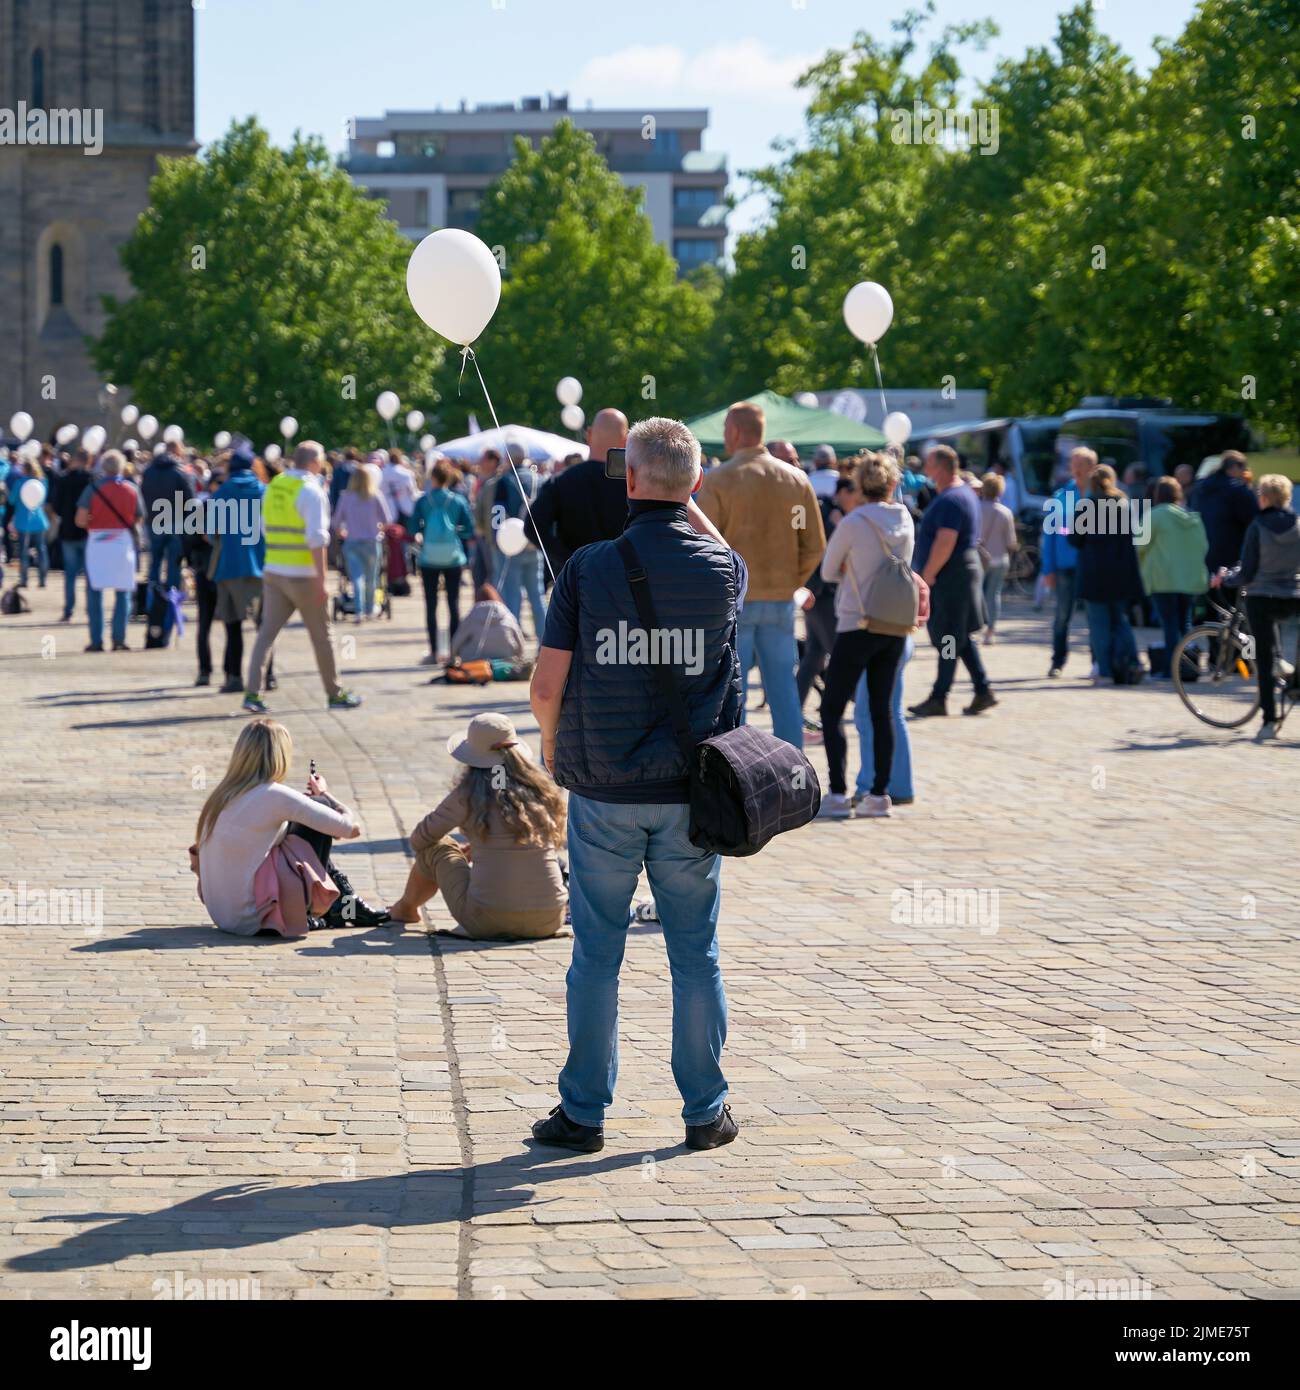 Protest event during the Corona pandemic on the cathedral square in Magdeburg in Germany Stock Photo